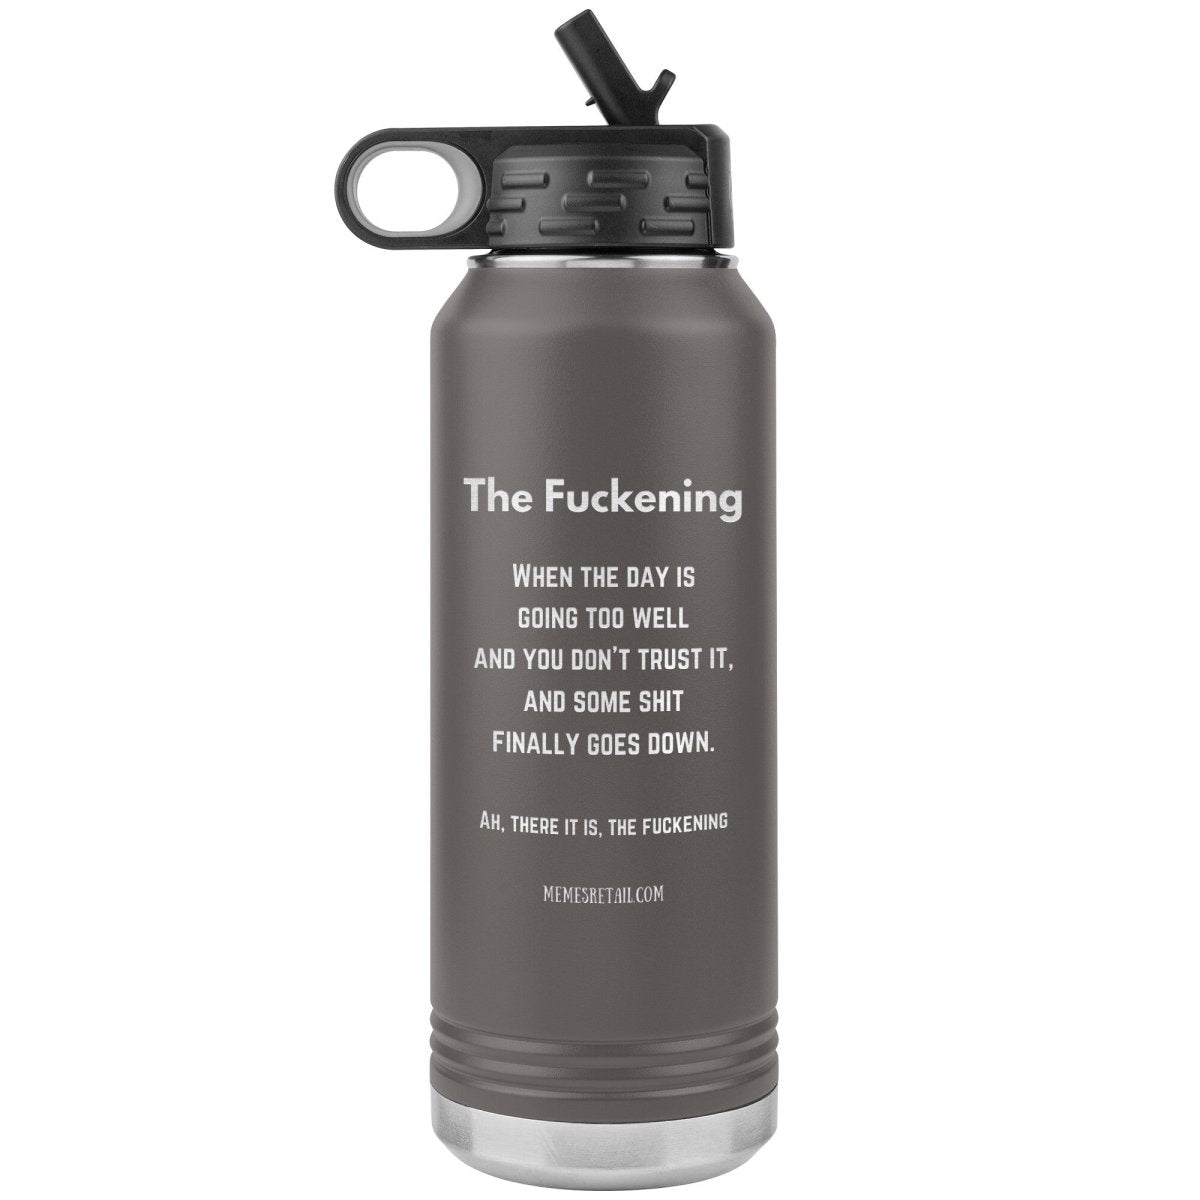 The Fuckening, When you don't trust the day. 32 oz Water Bottle, Pewter - MemesRetail.com